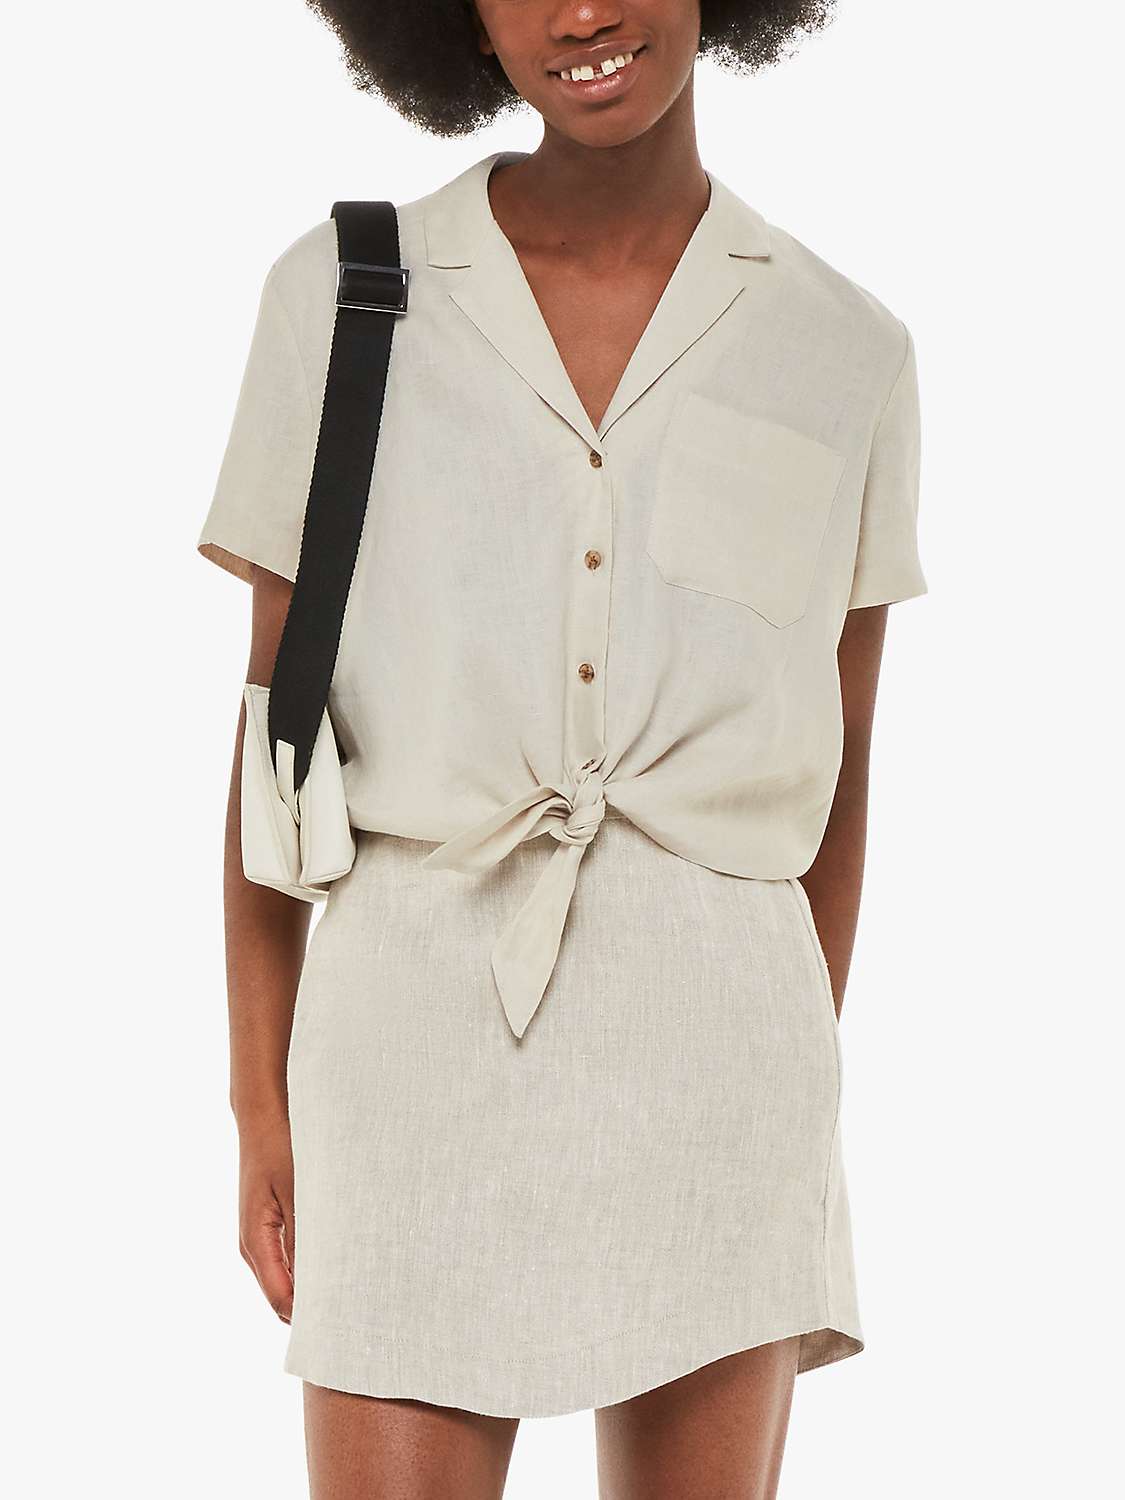 Buy Whistles Tie Front Linen Shirt, Stone Online at johnlewis.com